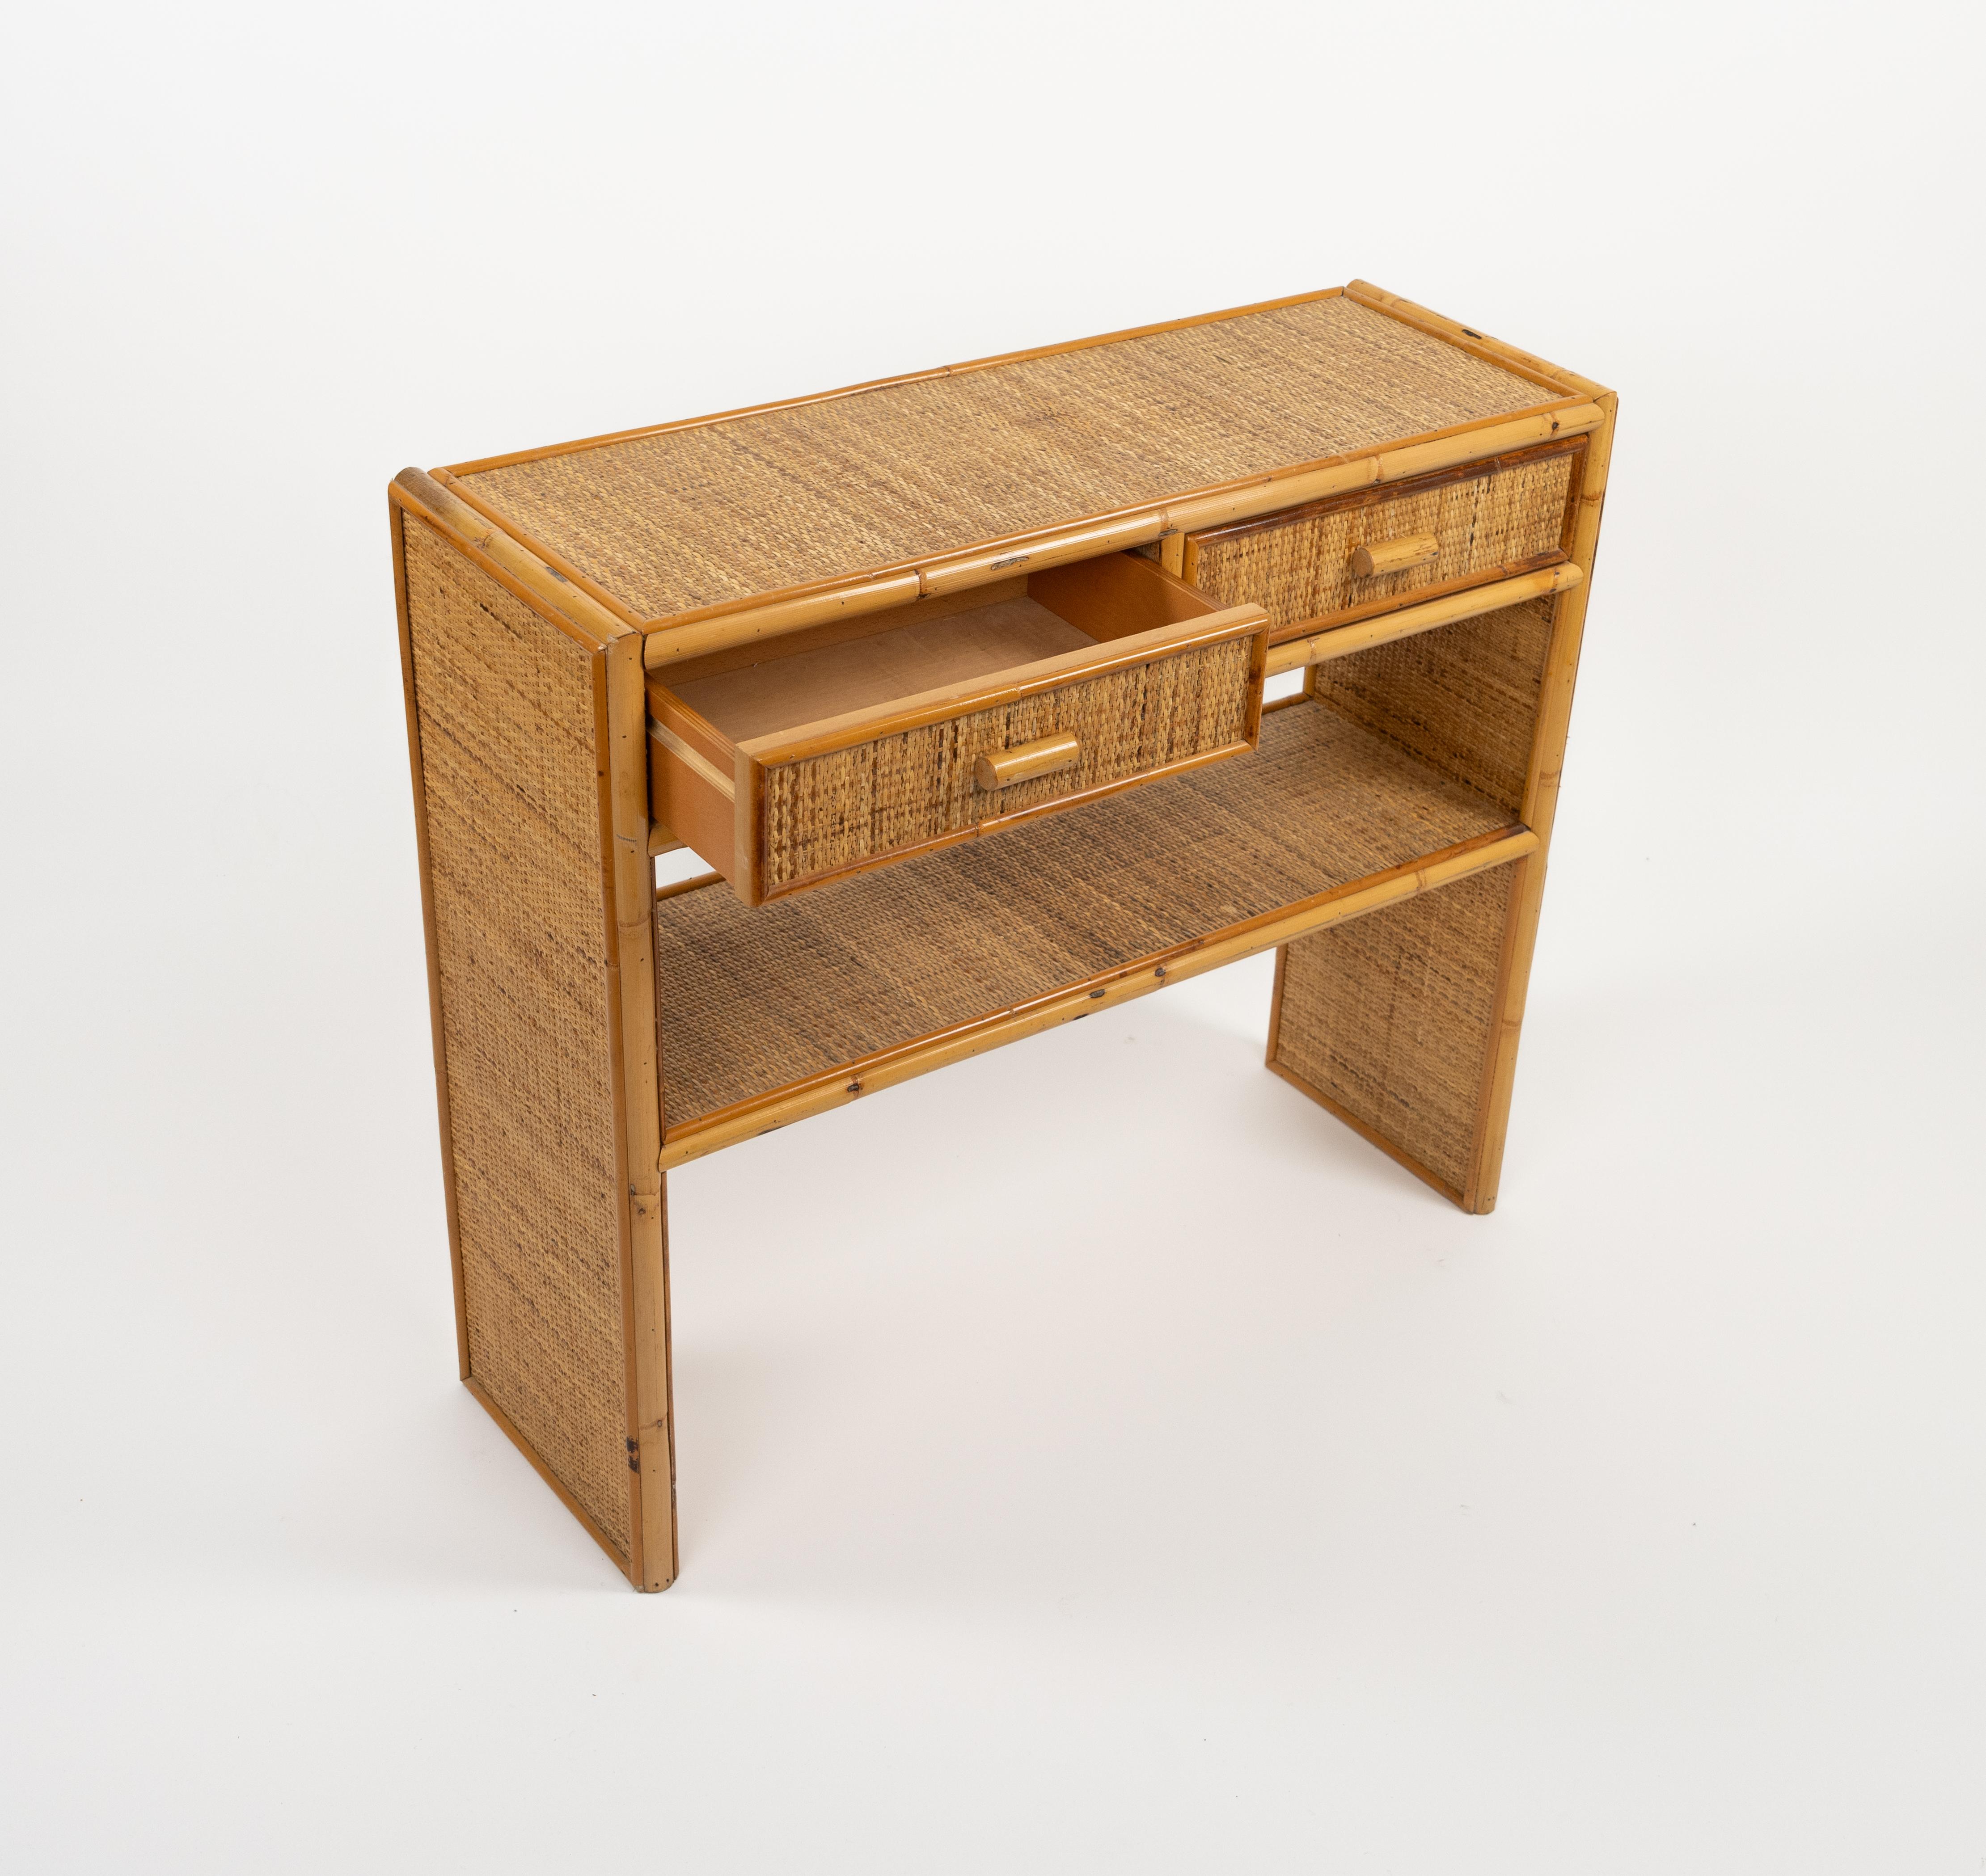 Midcentury Bamboo and Rattan Console Table with Drawers, Italy 1970s For Sale 1